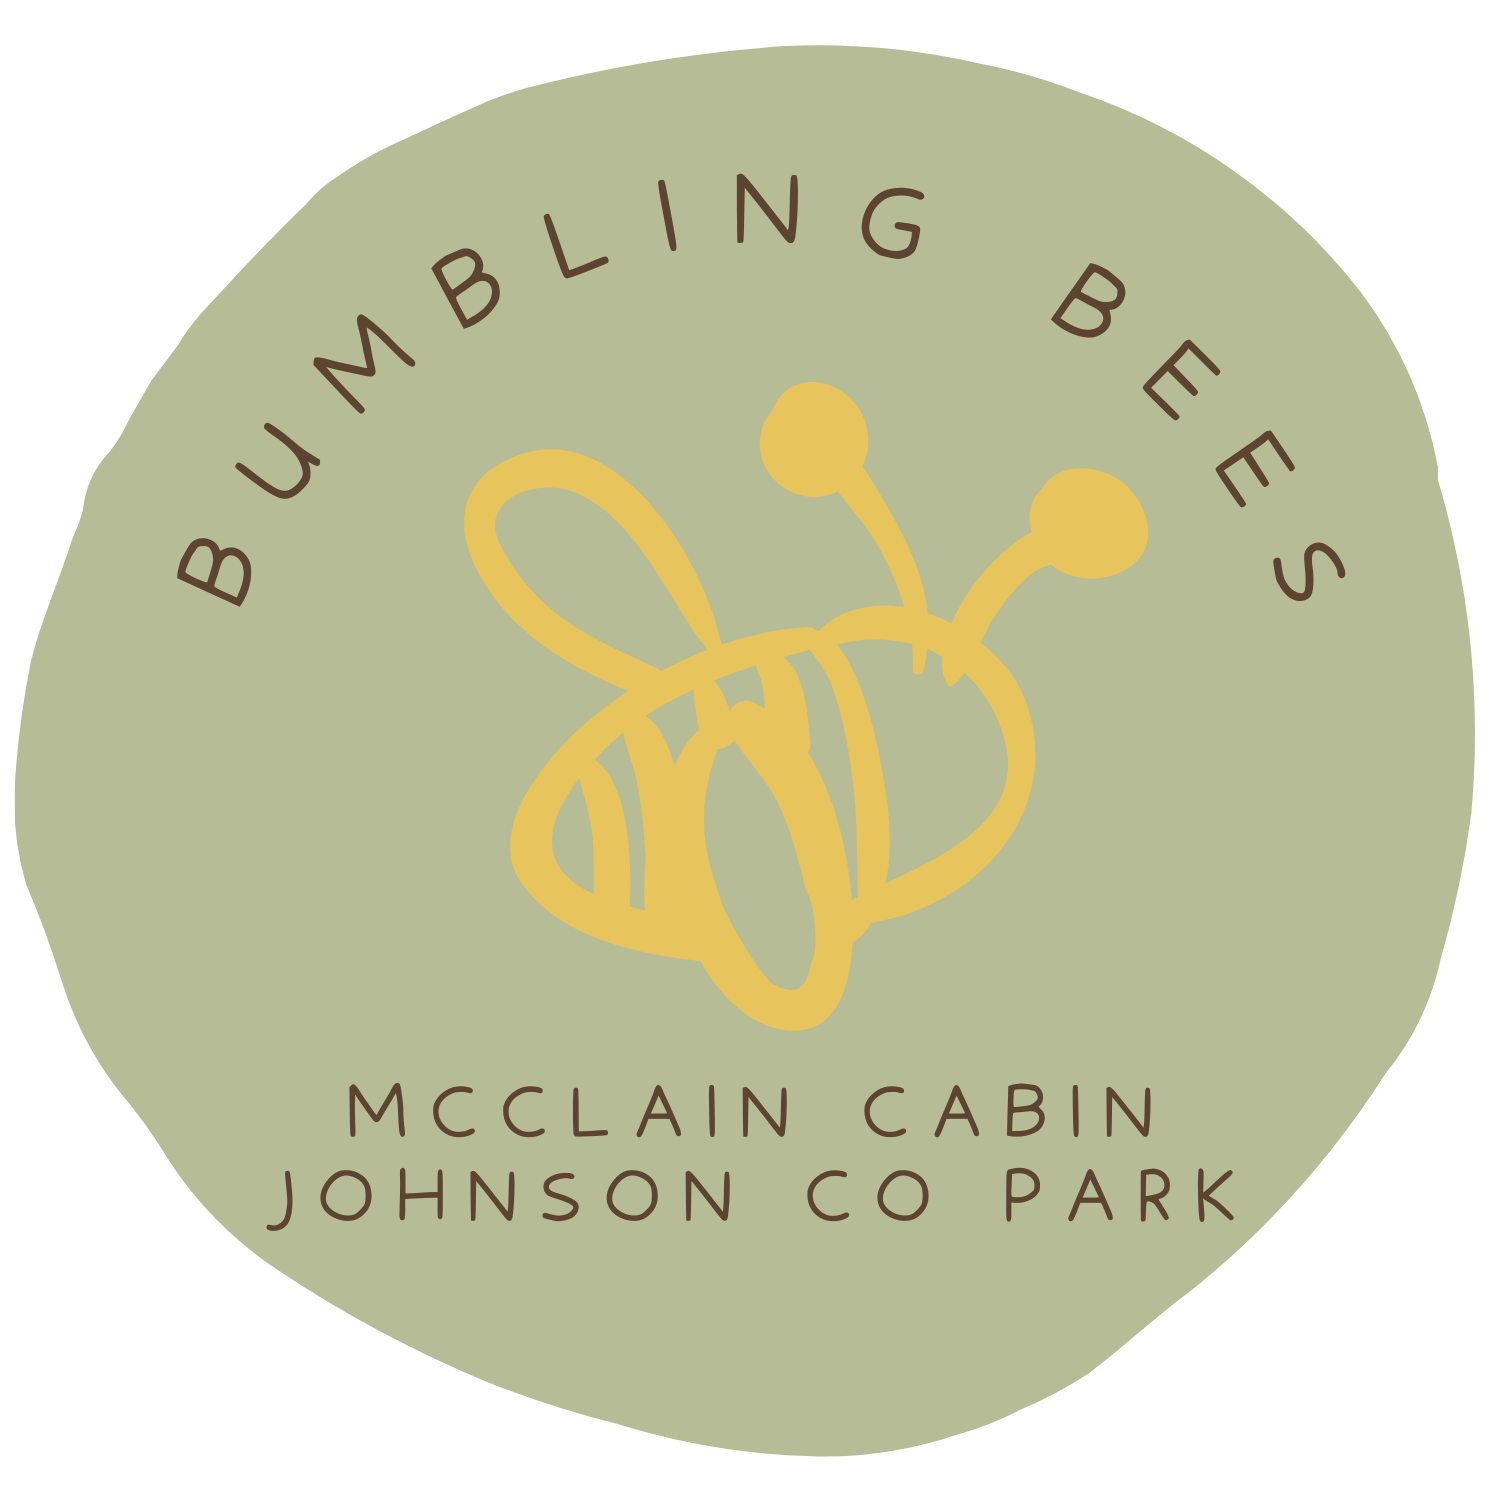  Click on the logo to explore McClain Cabin! 